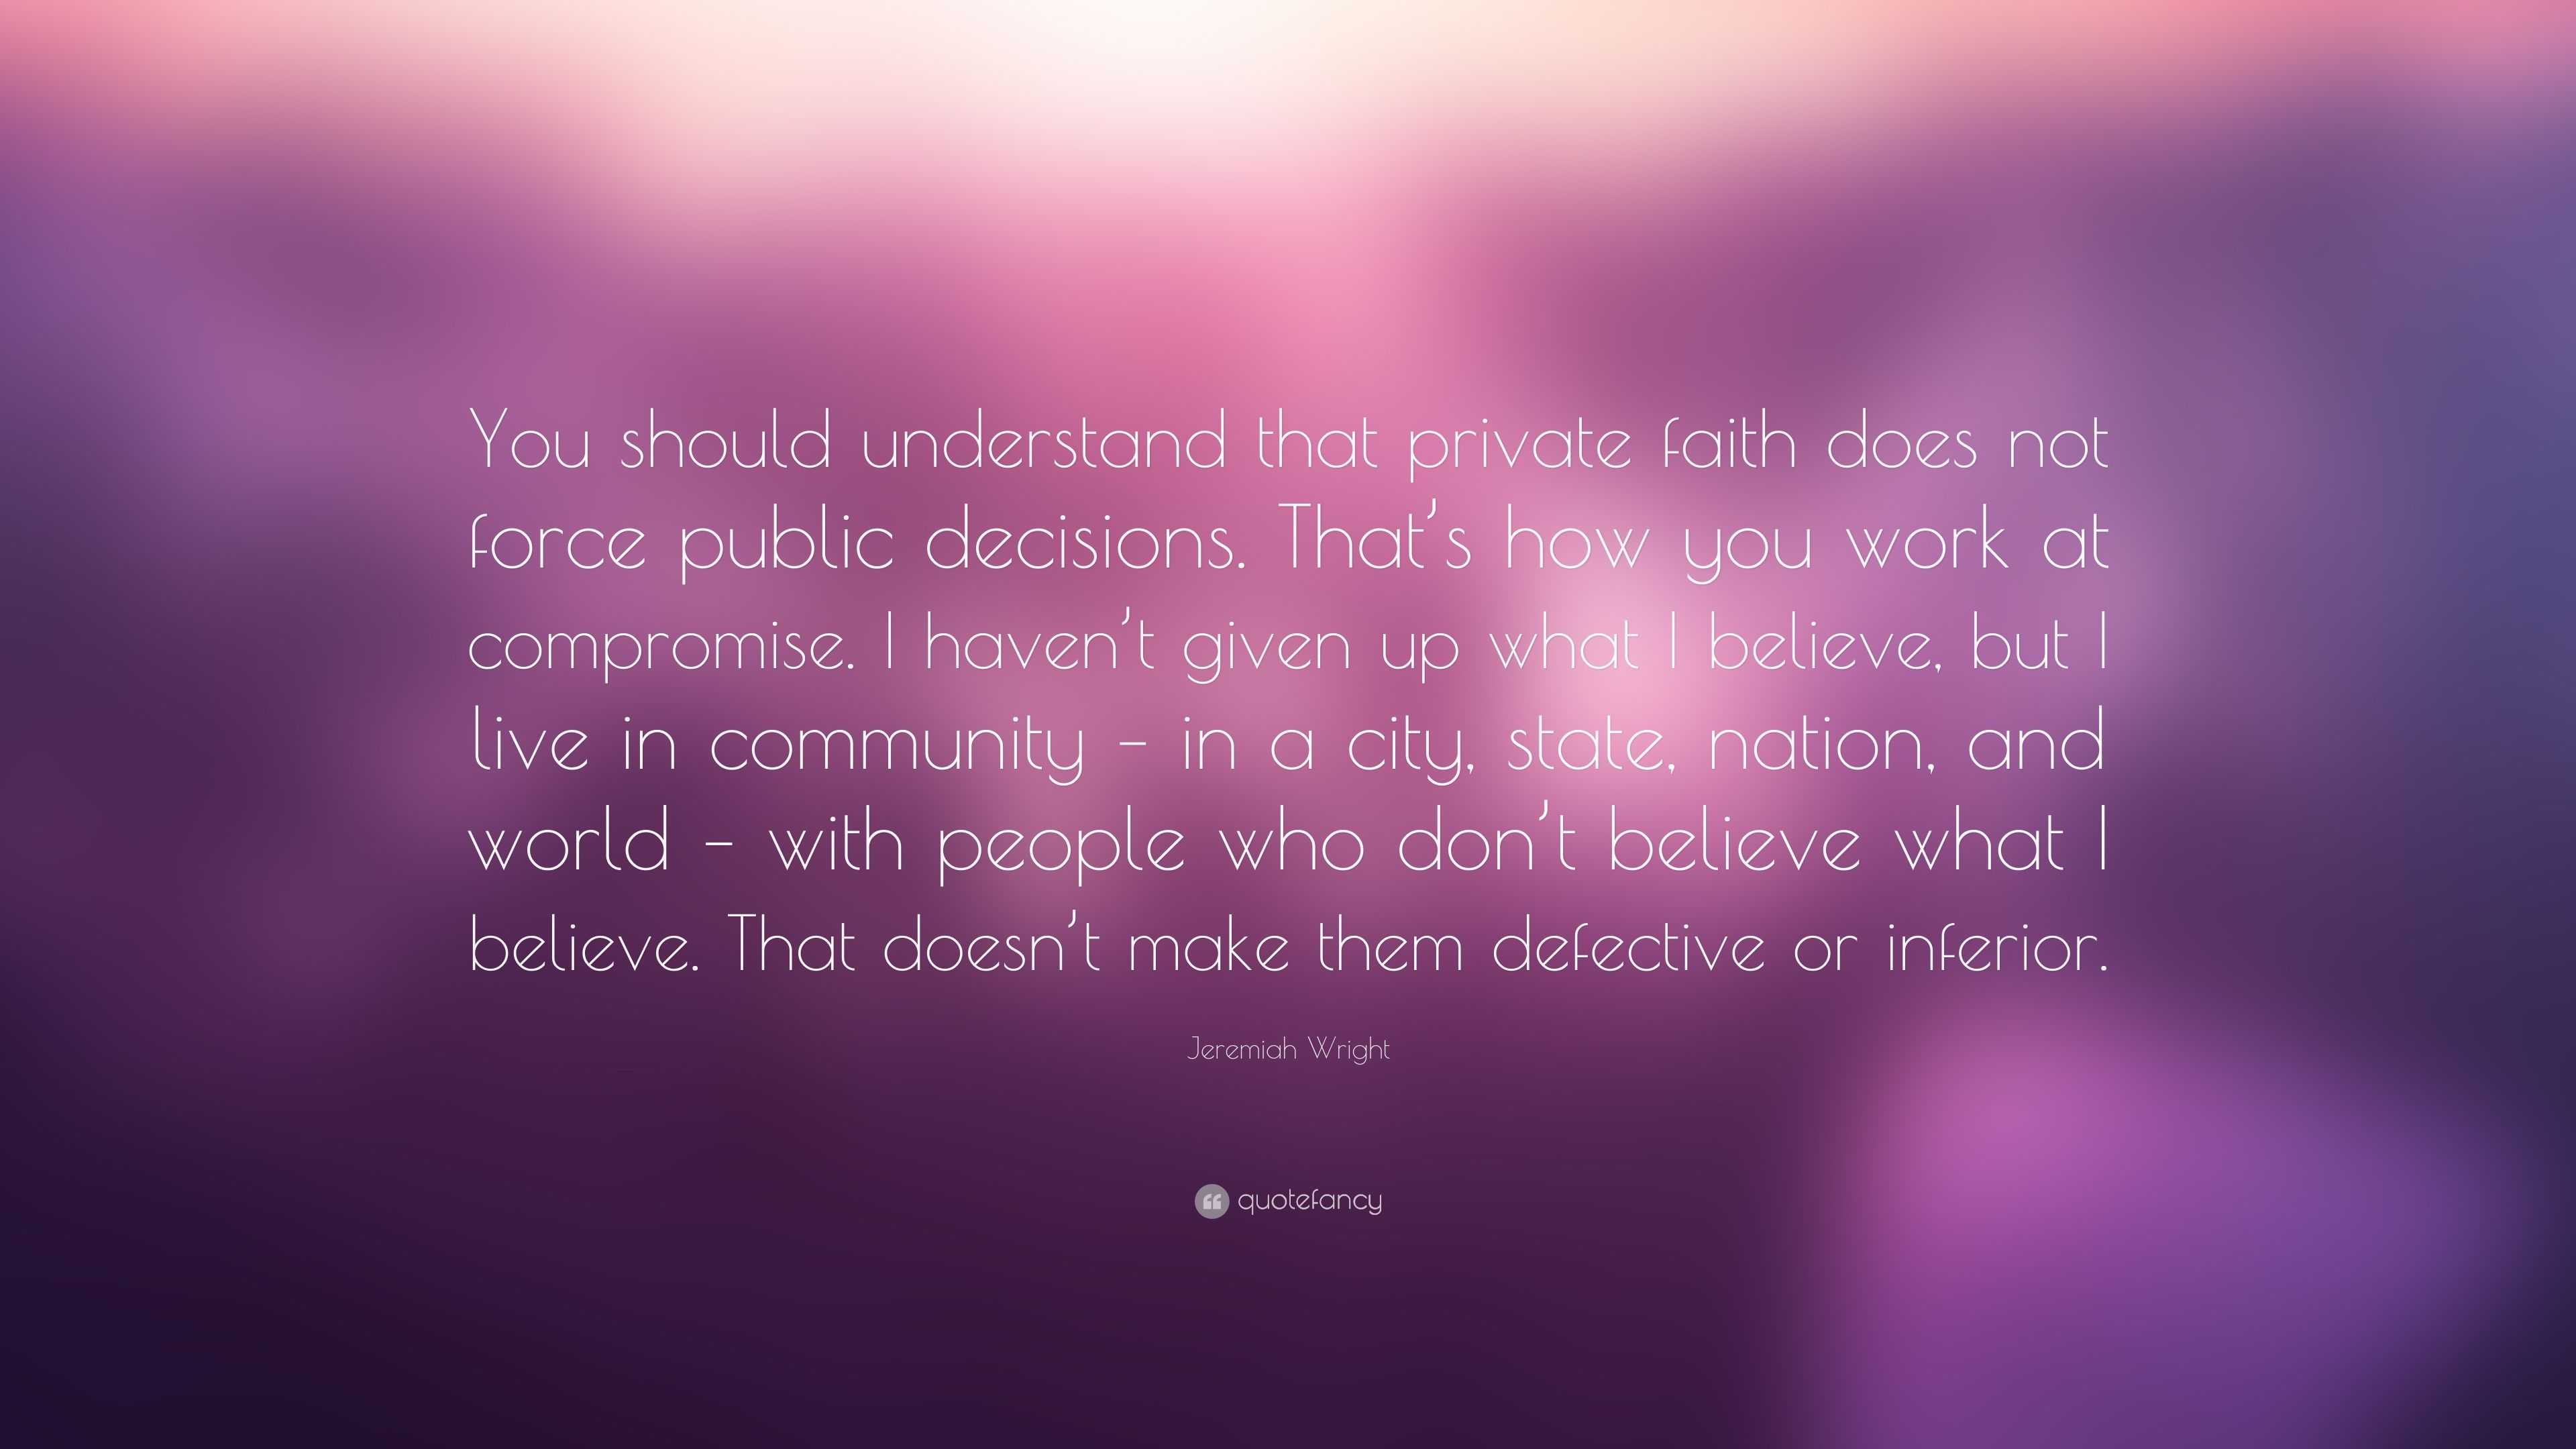 Jeremiah Wright Quote: “You should understand that private faith does ...